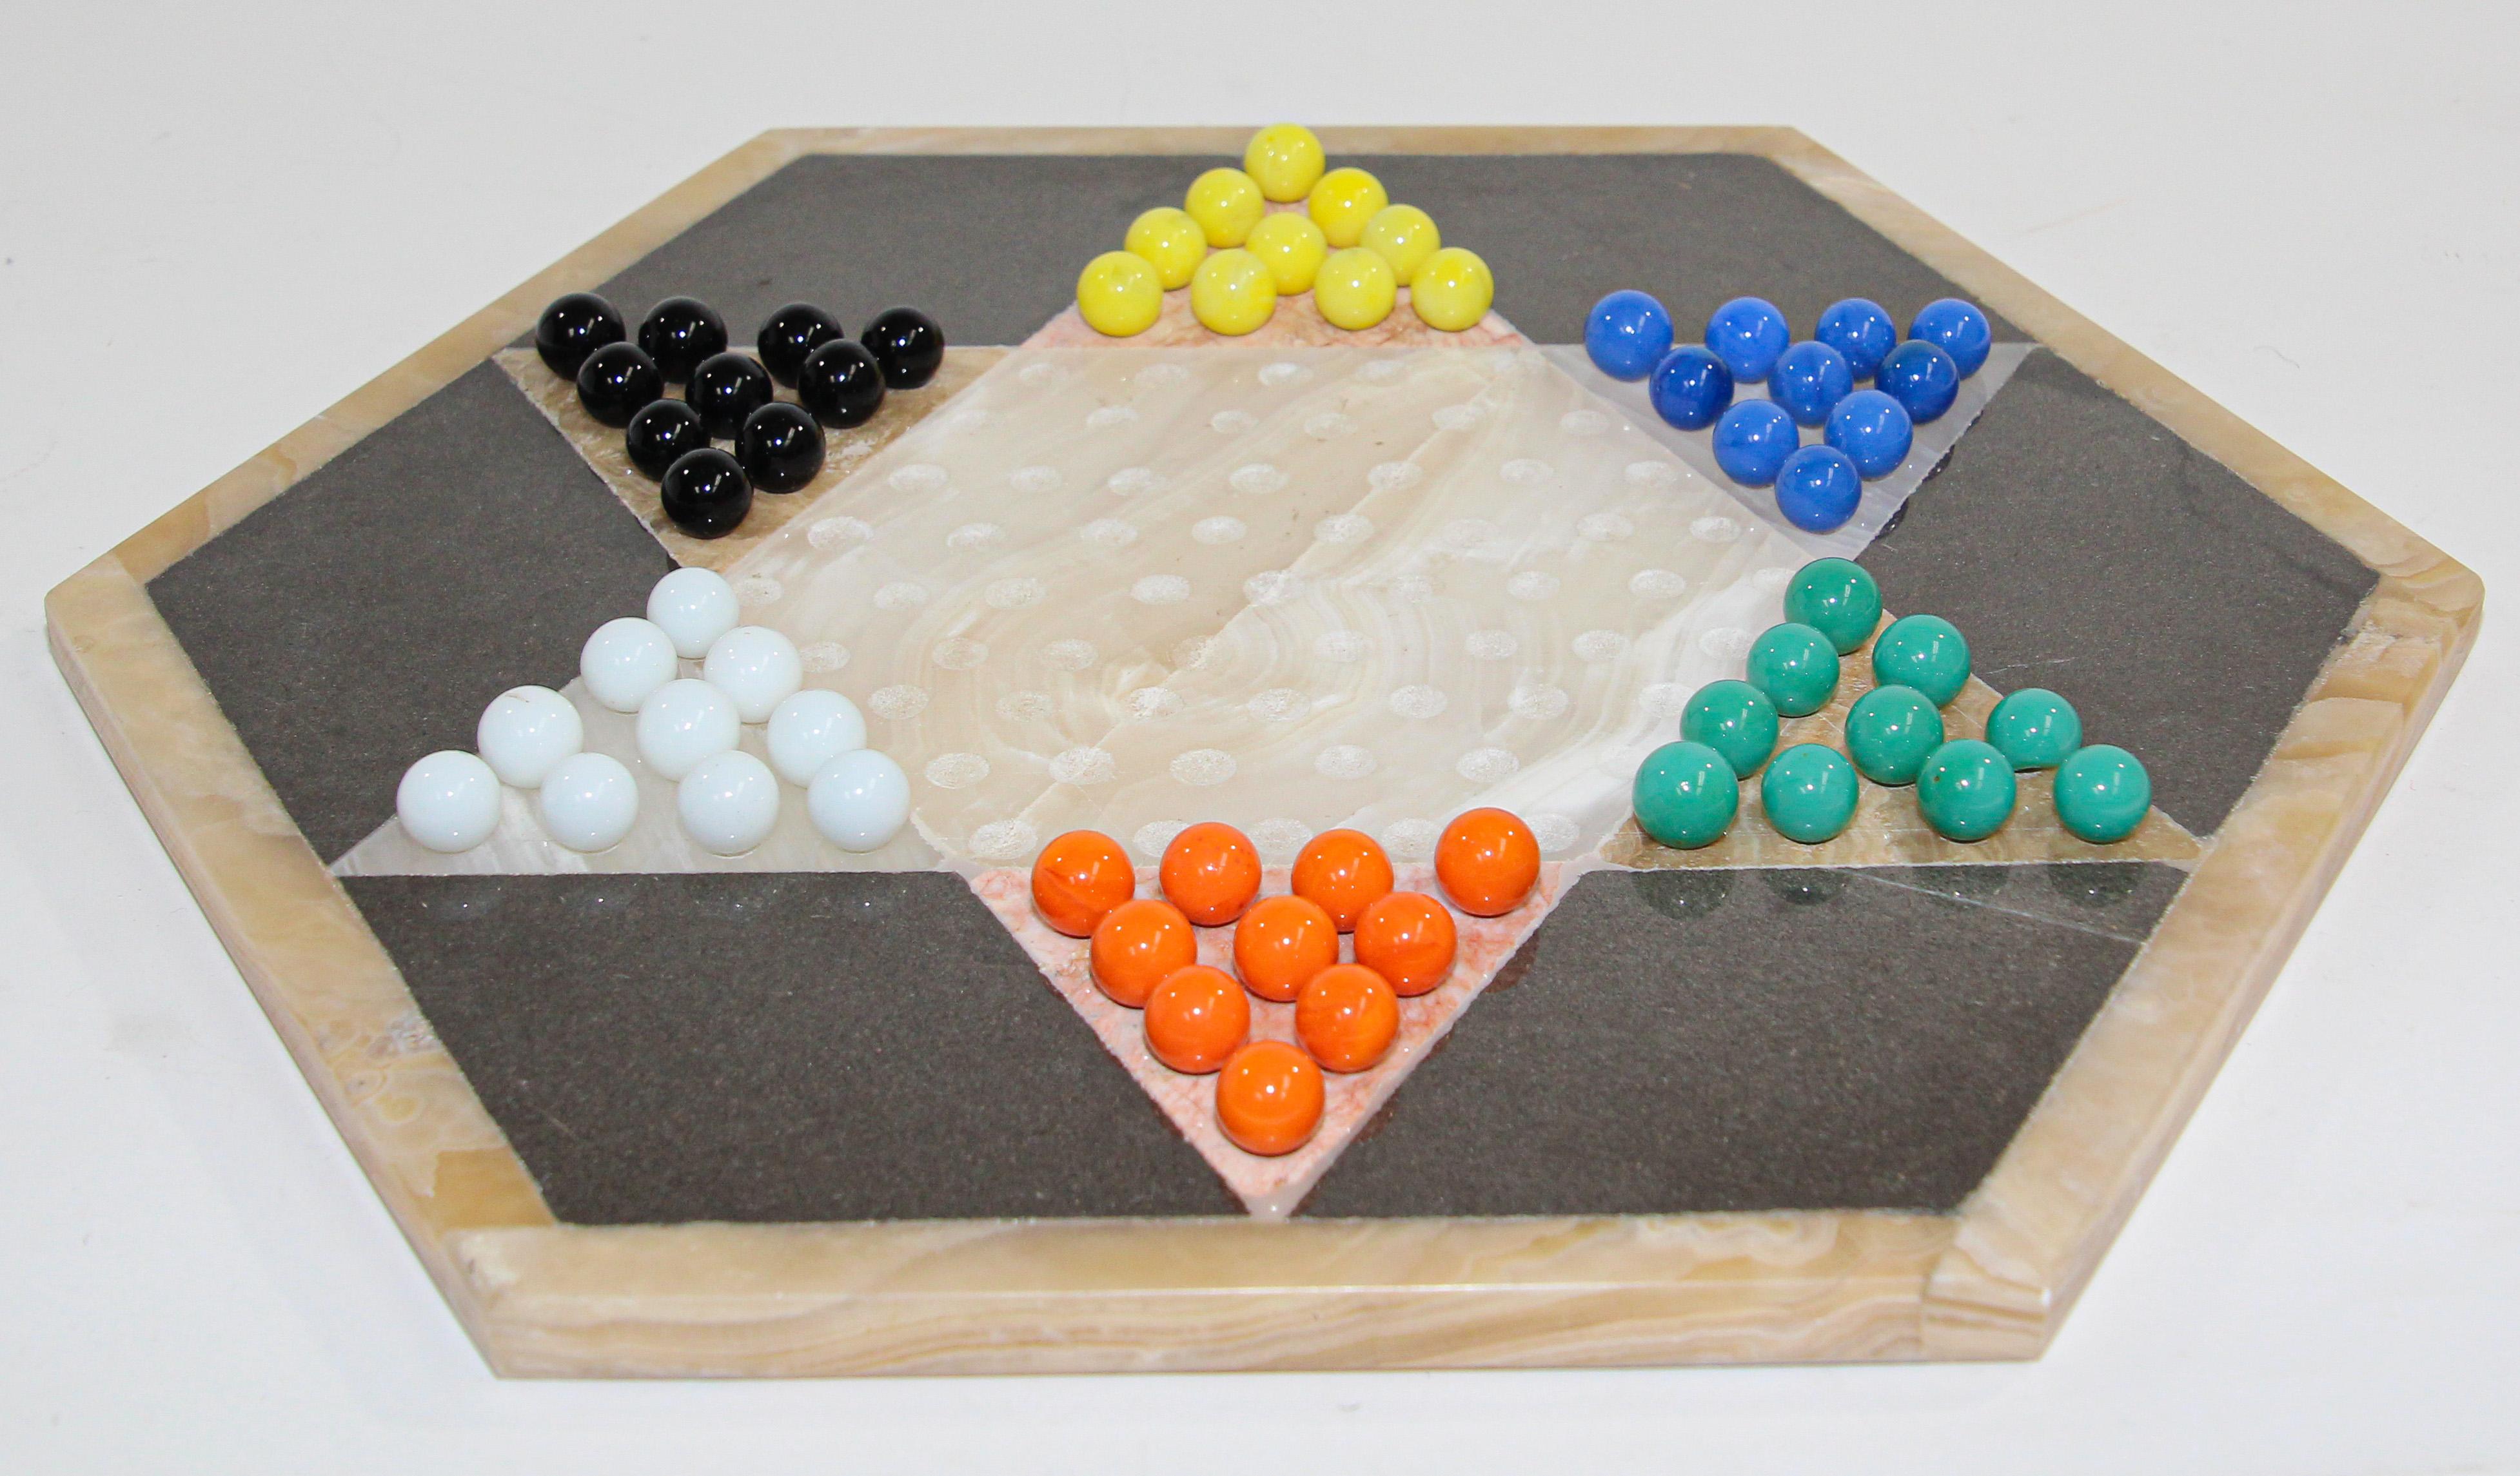 Vintage marble Chinese checkers game set with board of octagonal form set complete with thirty-one pieces.
Hand Crafted rose marble and sleek black onyx marble Chinese checkers game set.
Hand made with three varied tones of natural stone unite in